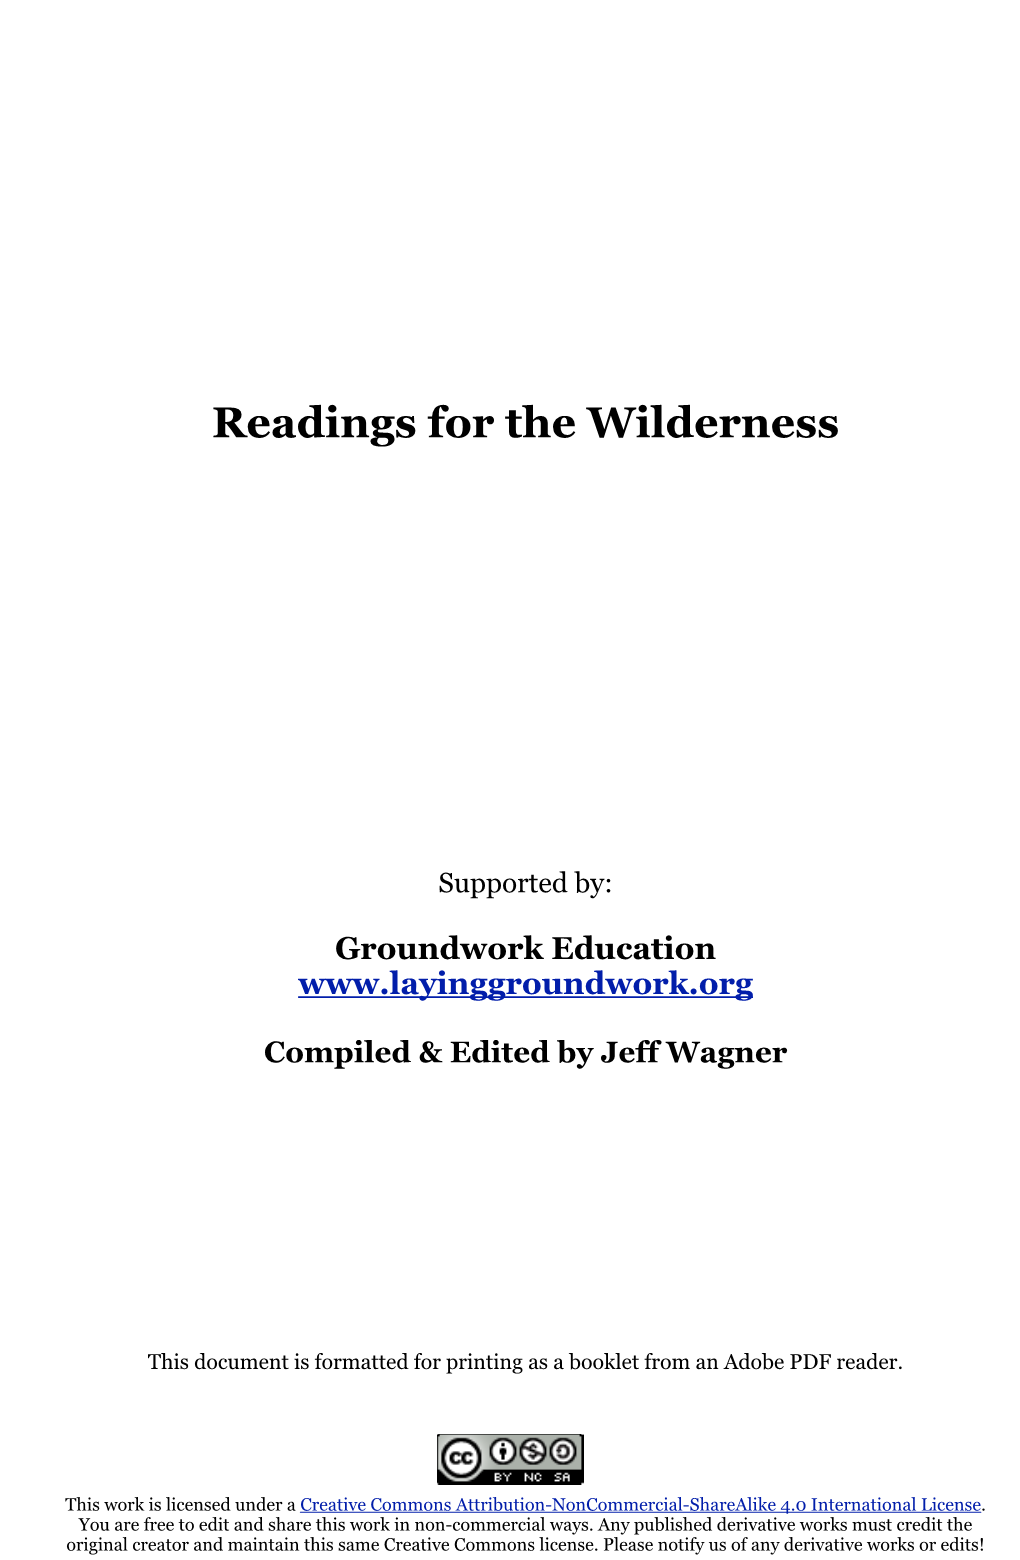 Readings-For-The-Wilderness-Jeff-Wagner.Pdf